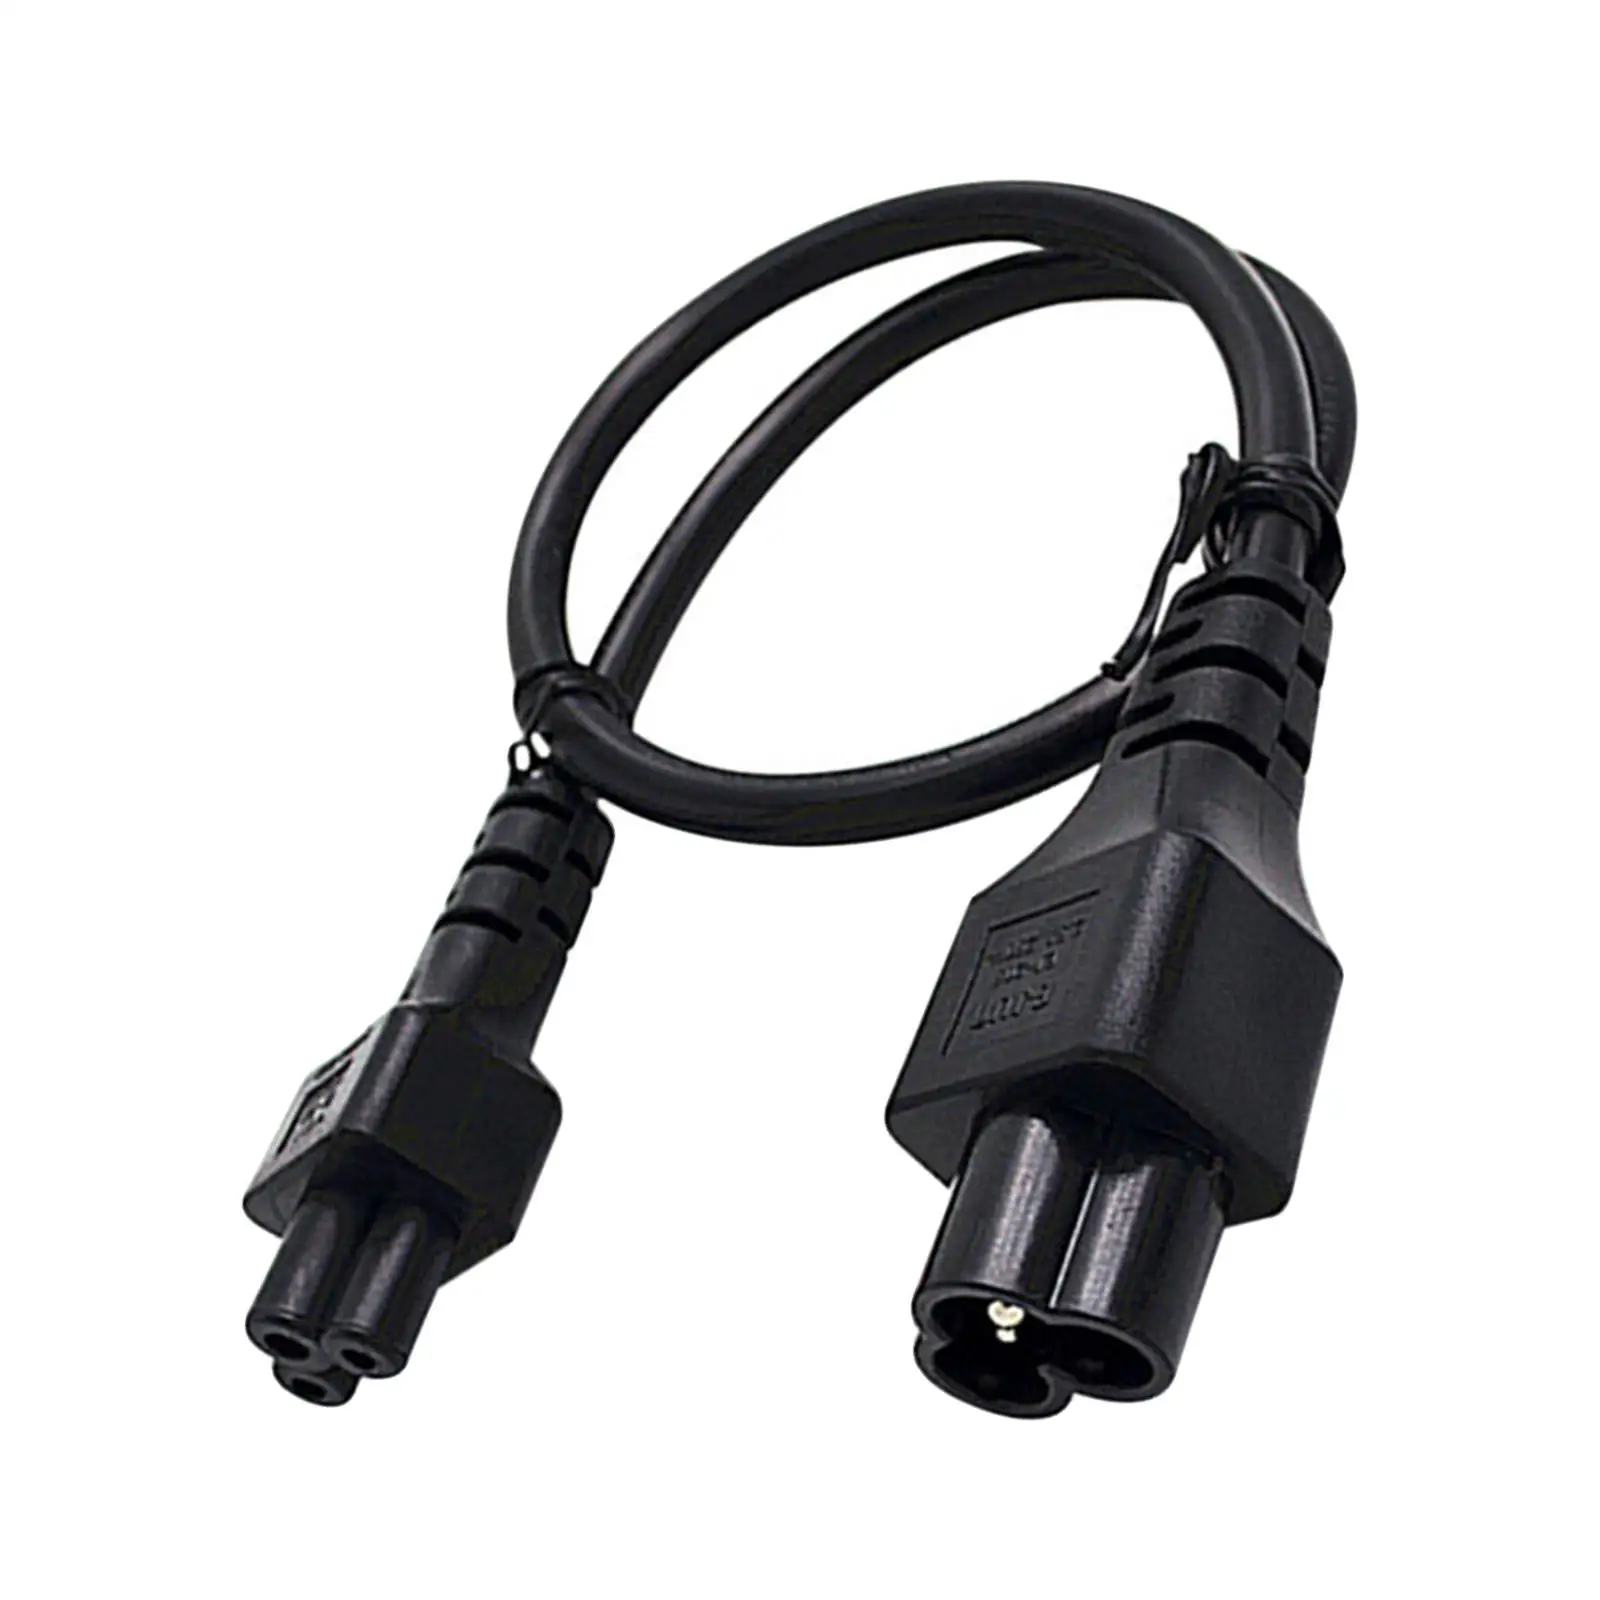 C6 to C5 PC Power Cord Cable 2ft/0.6M Low Resistance Stable Transmission Male to Female for Computer Notebook Scanner Laptop